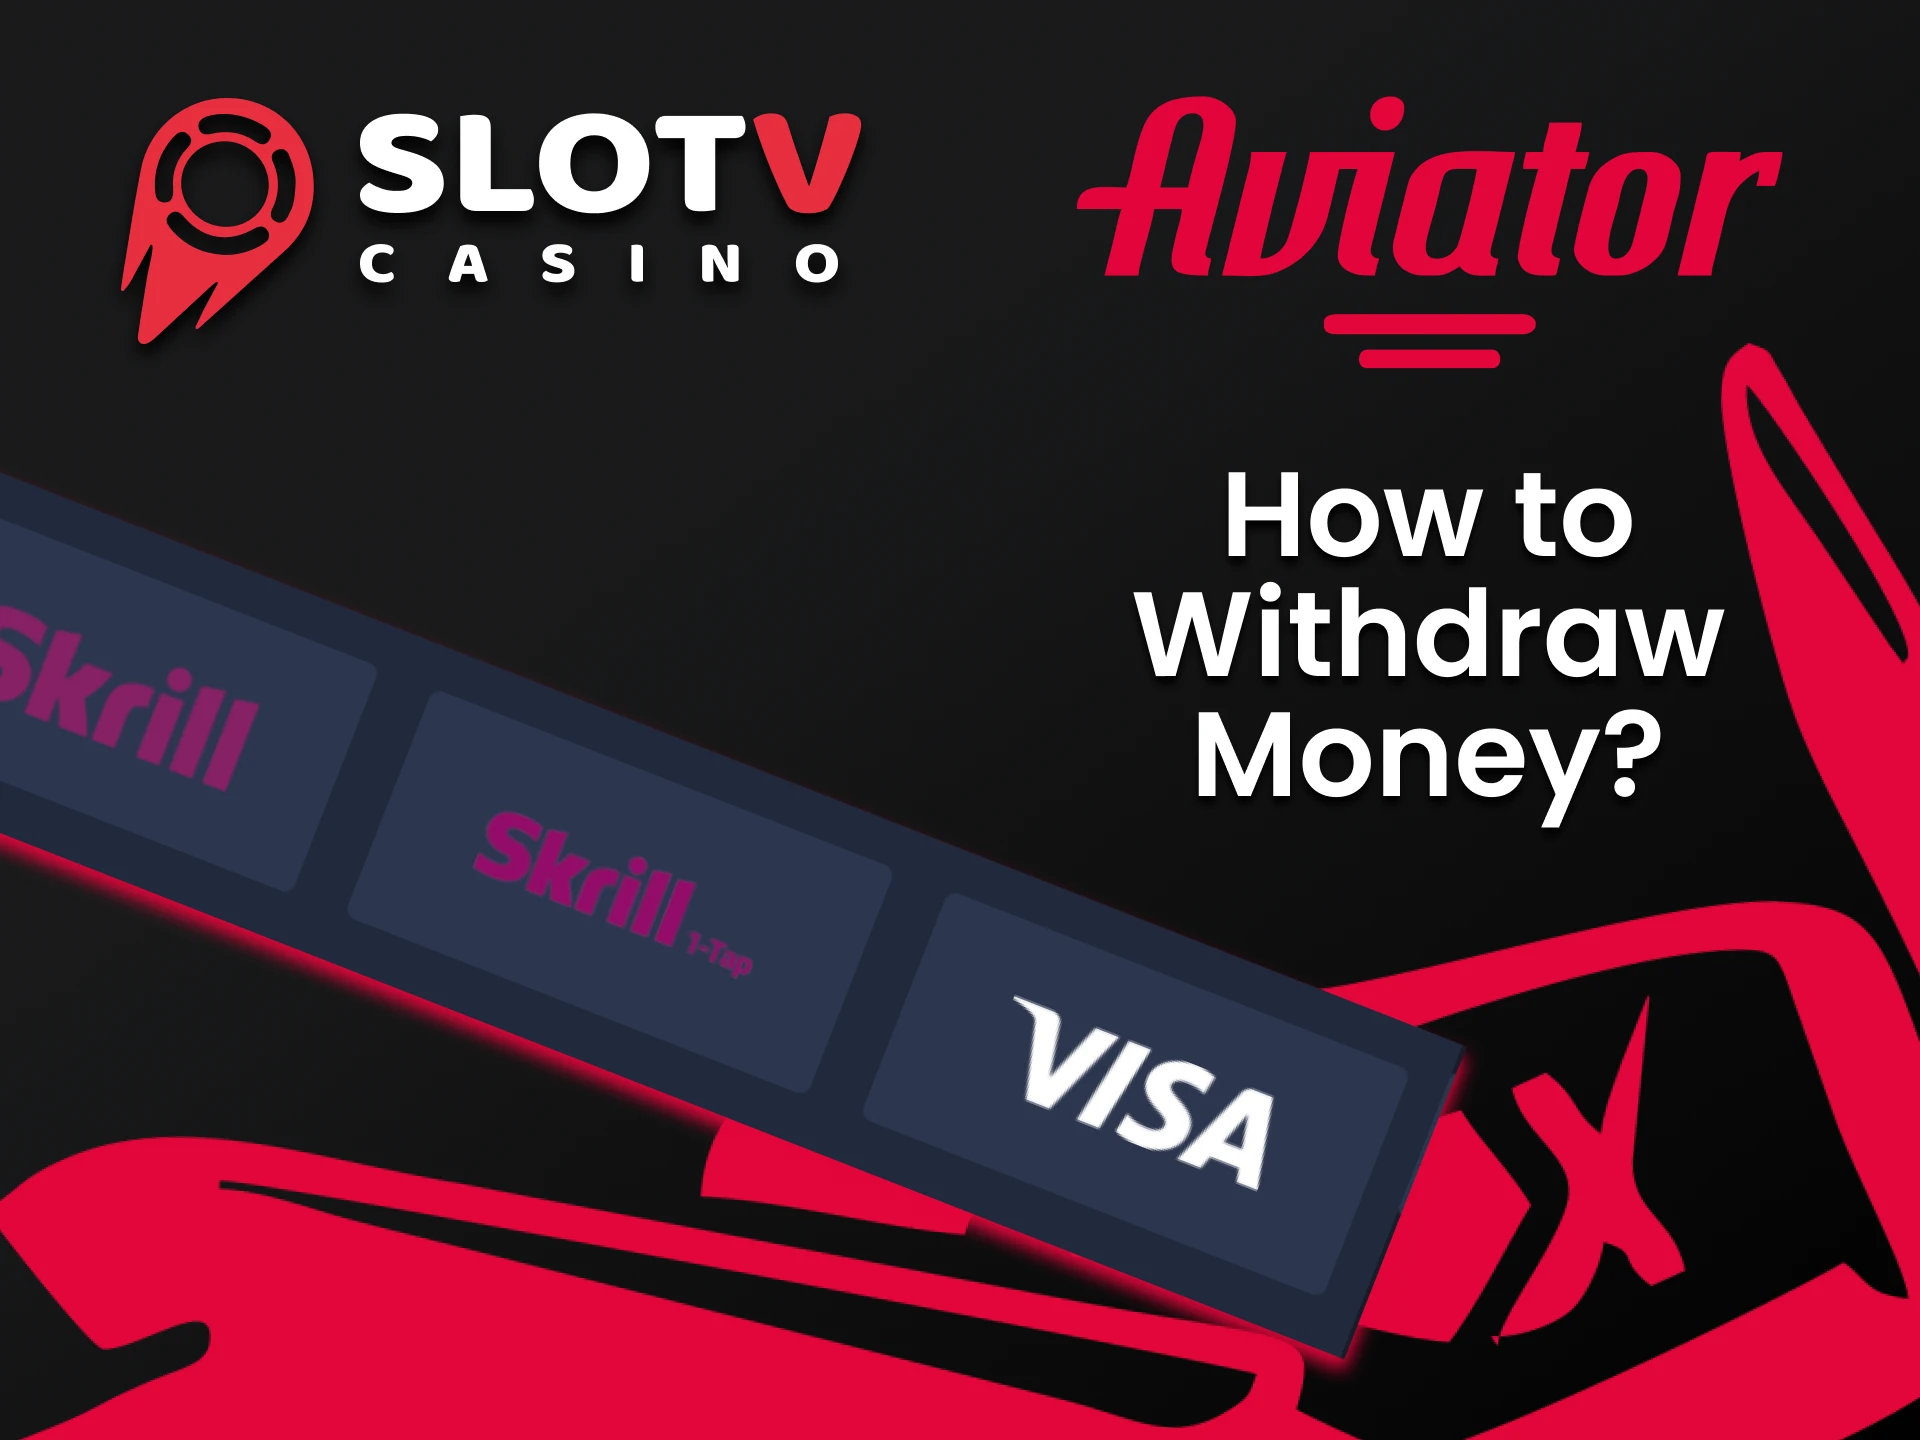 Find out how to withdraw funds from SlotV for Aviator.